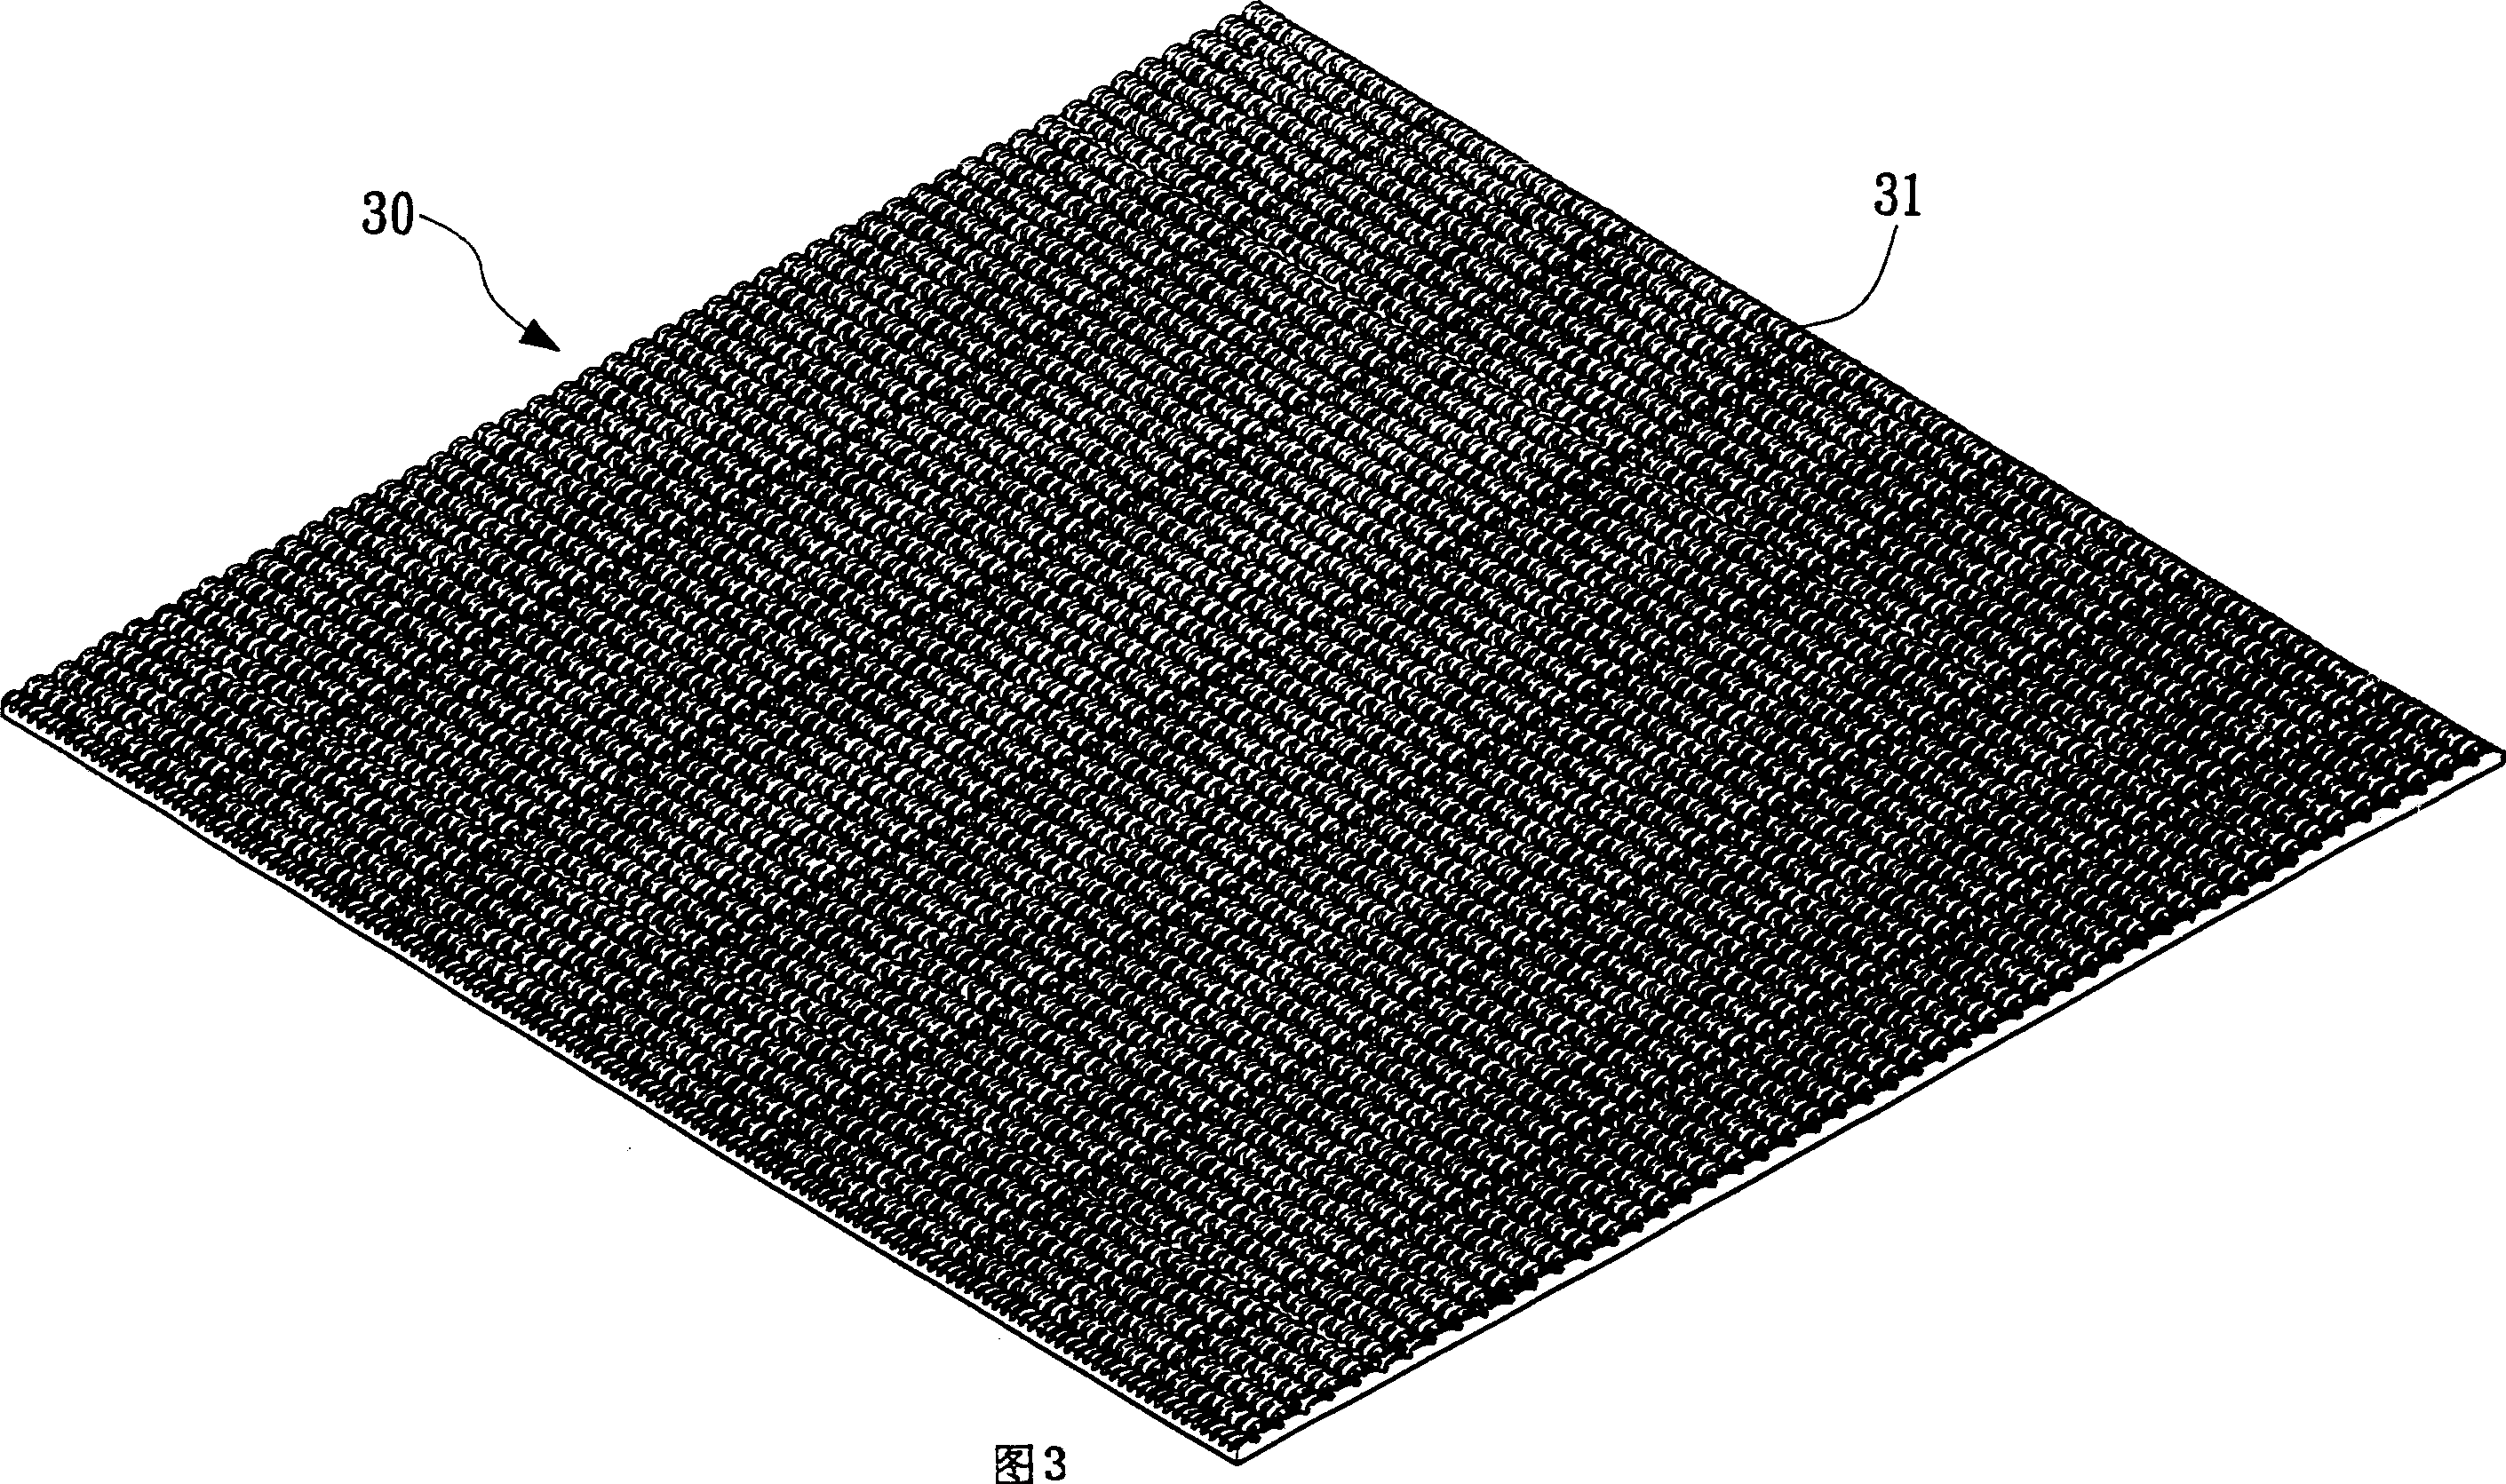 Method for construction of polyurethane track of sports field